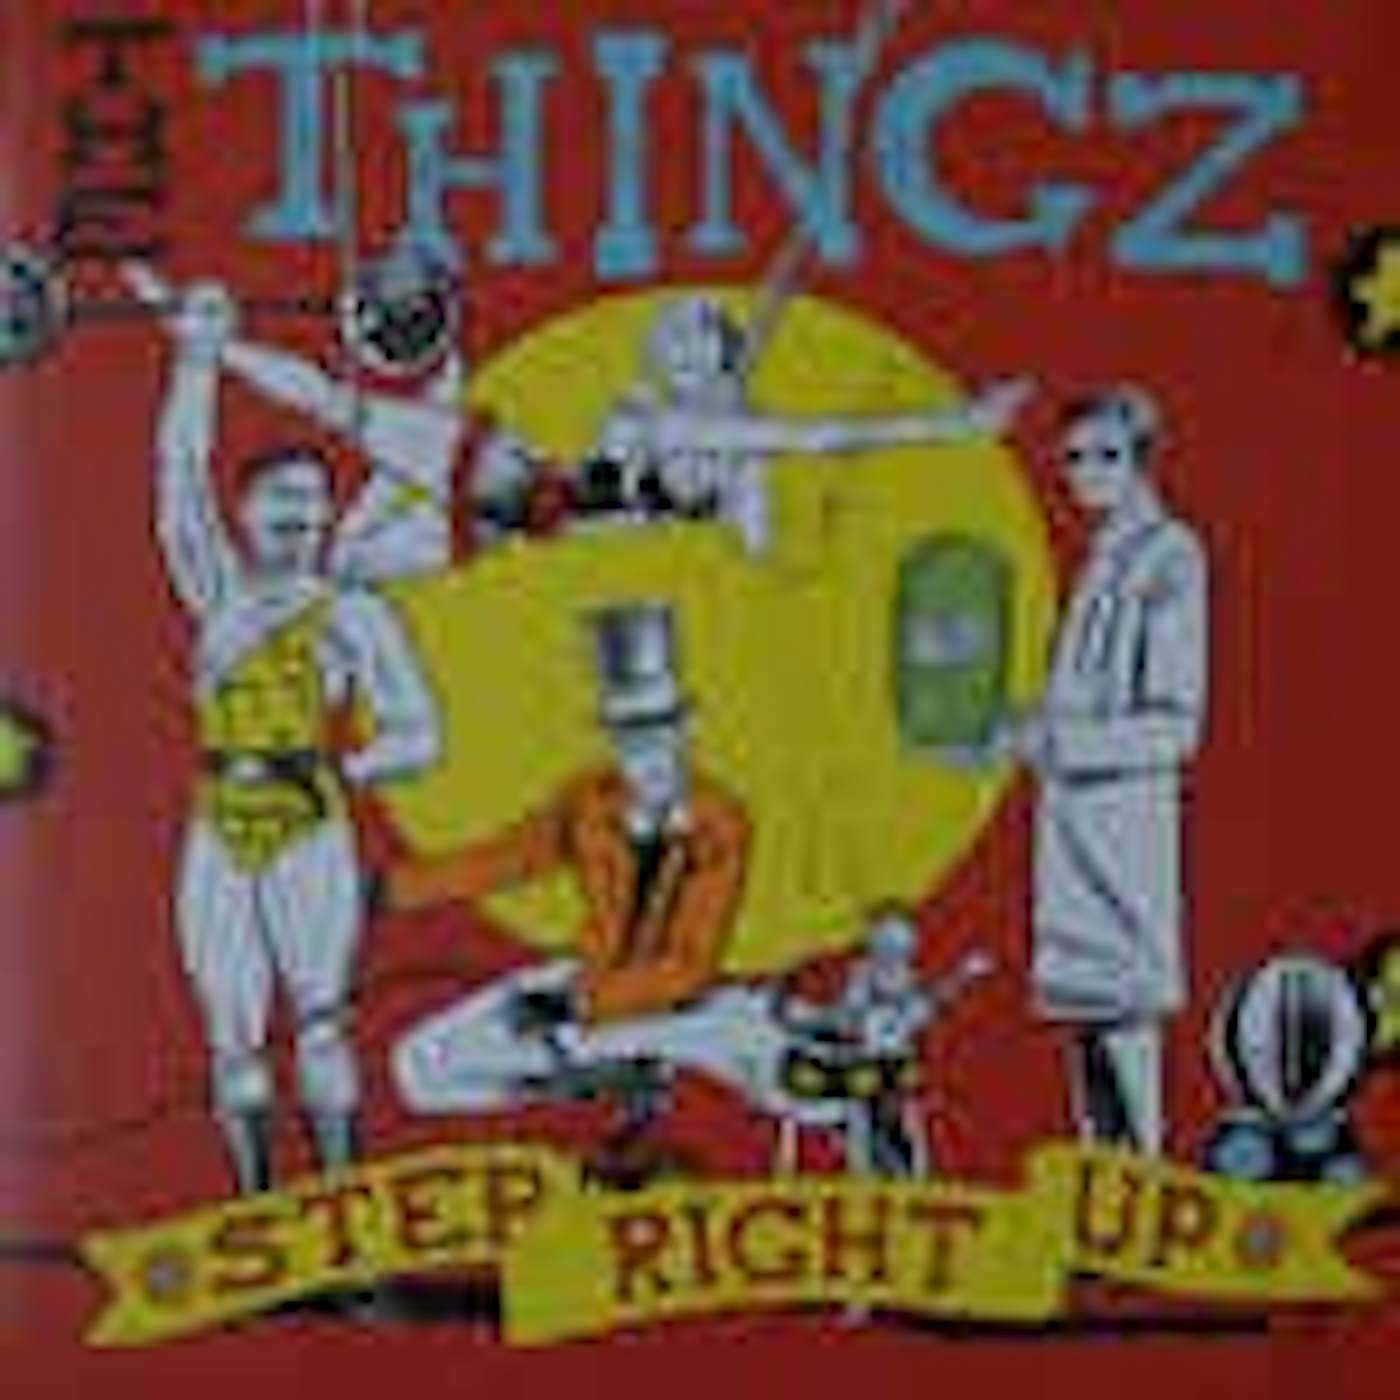 The Thingz STEP RIGHT UP Vinyl Record